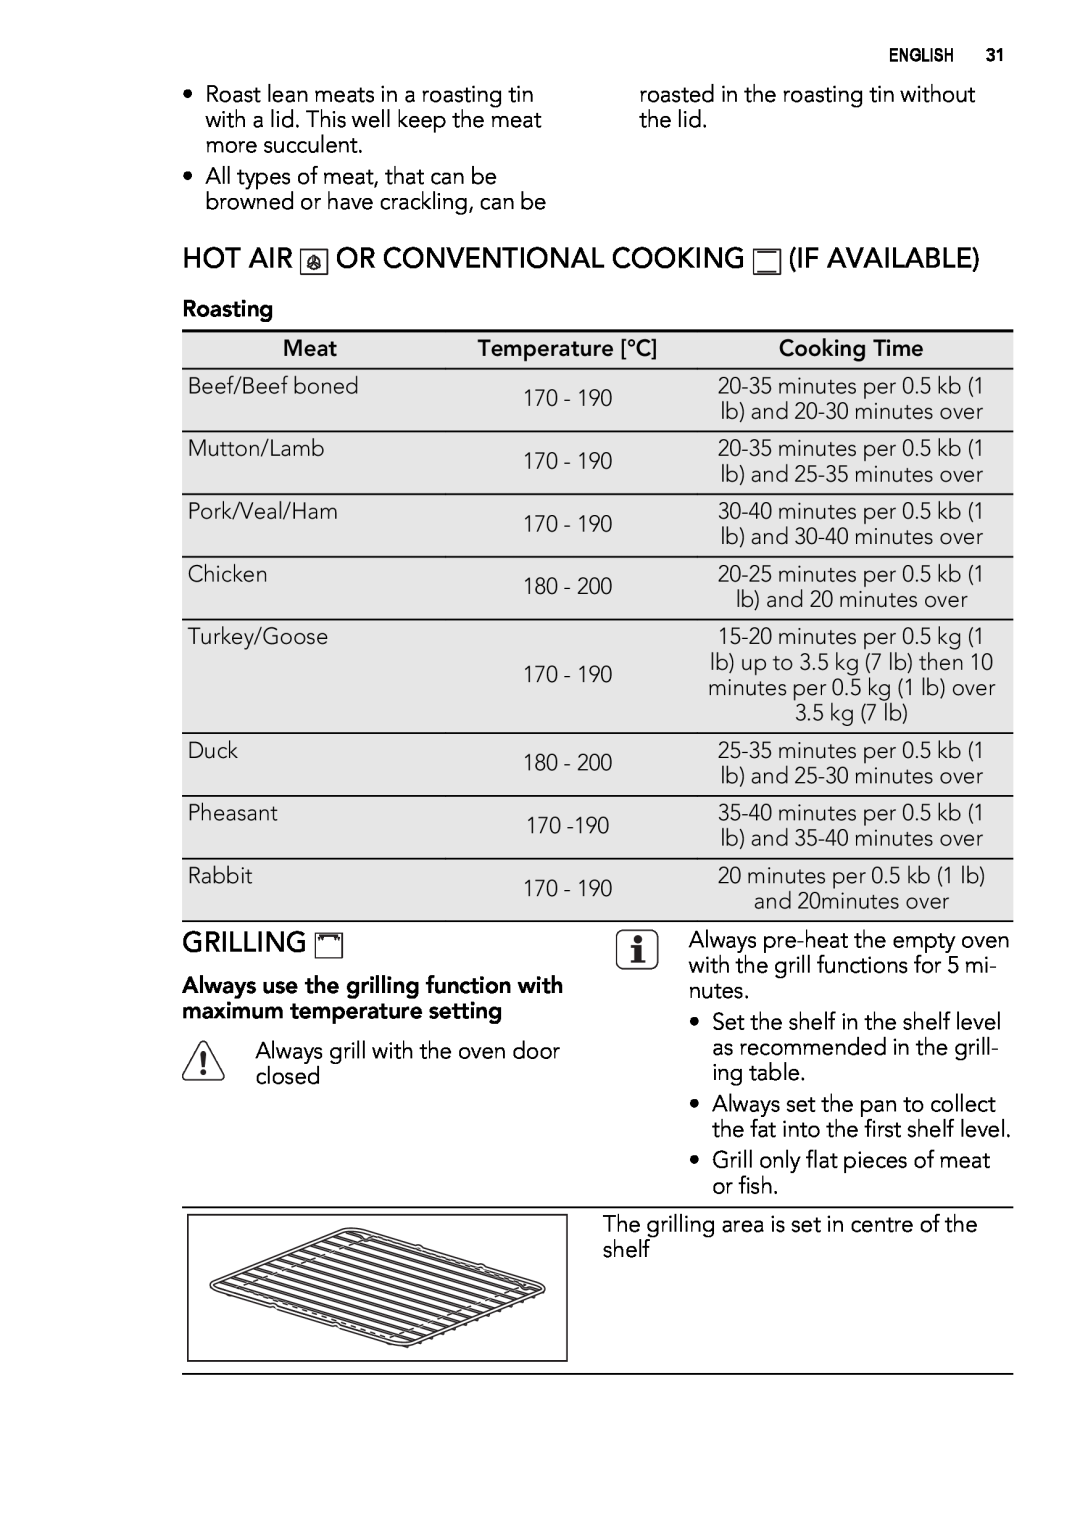 AEG 49332I-MN user manual Hot Air Or Conventional Cooking If Available, Grilling 